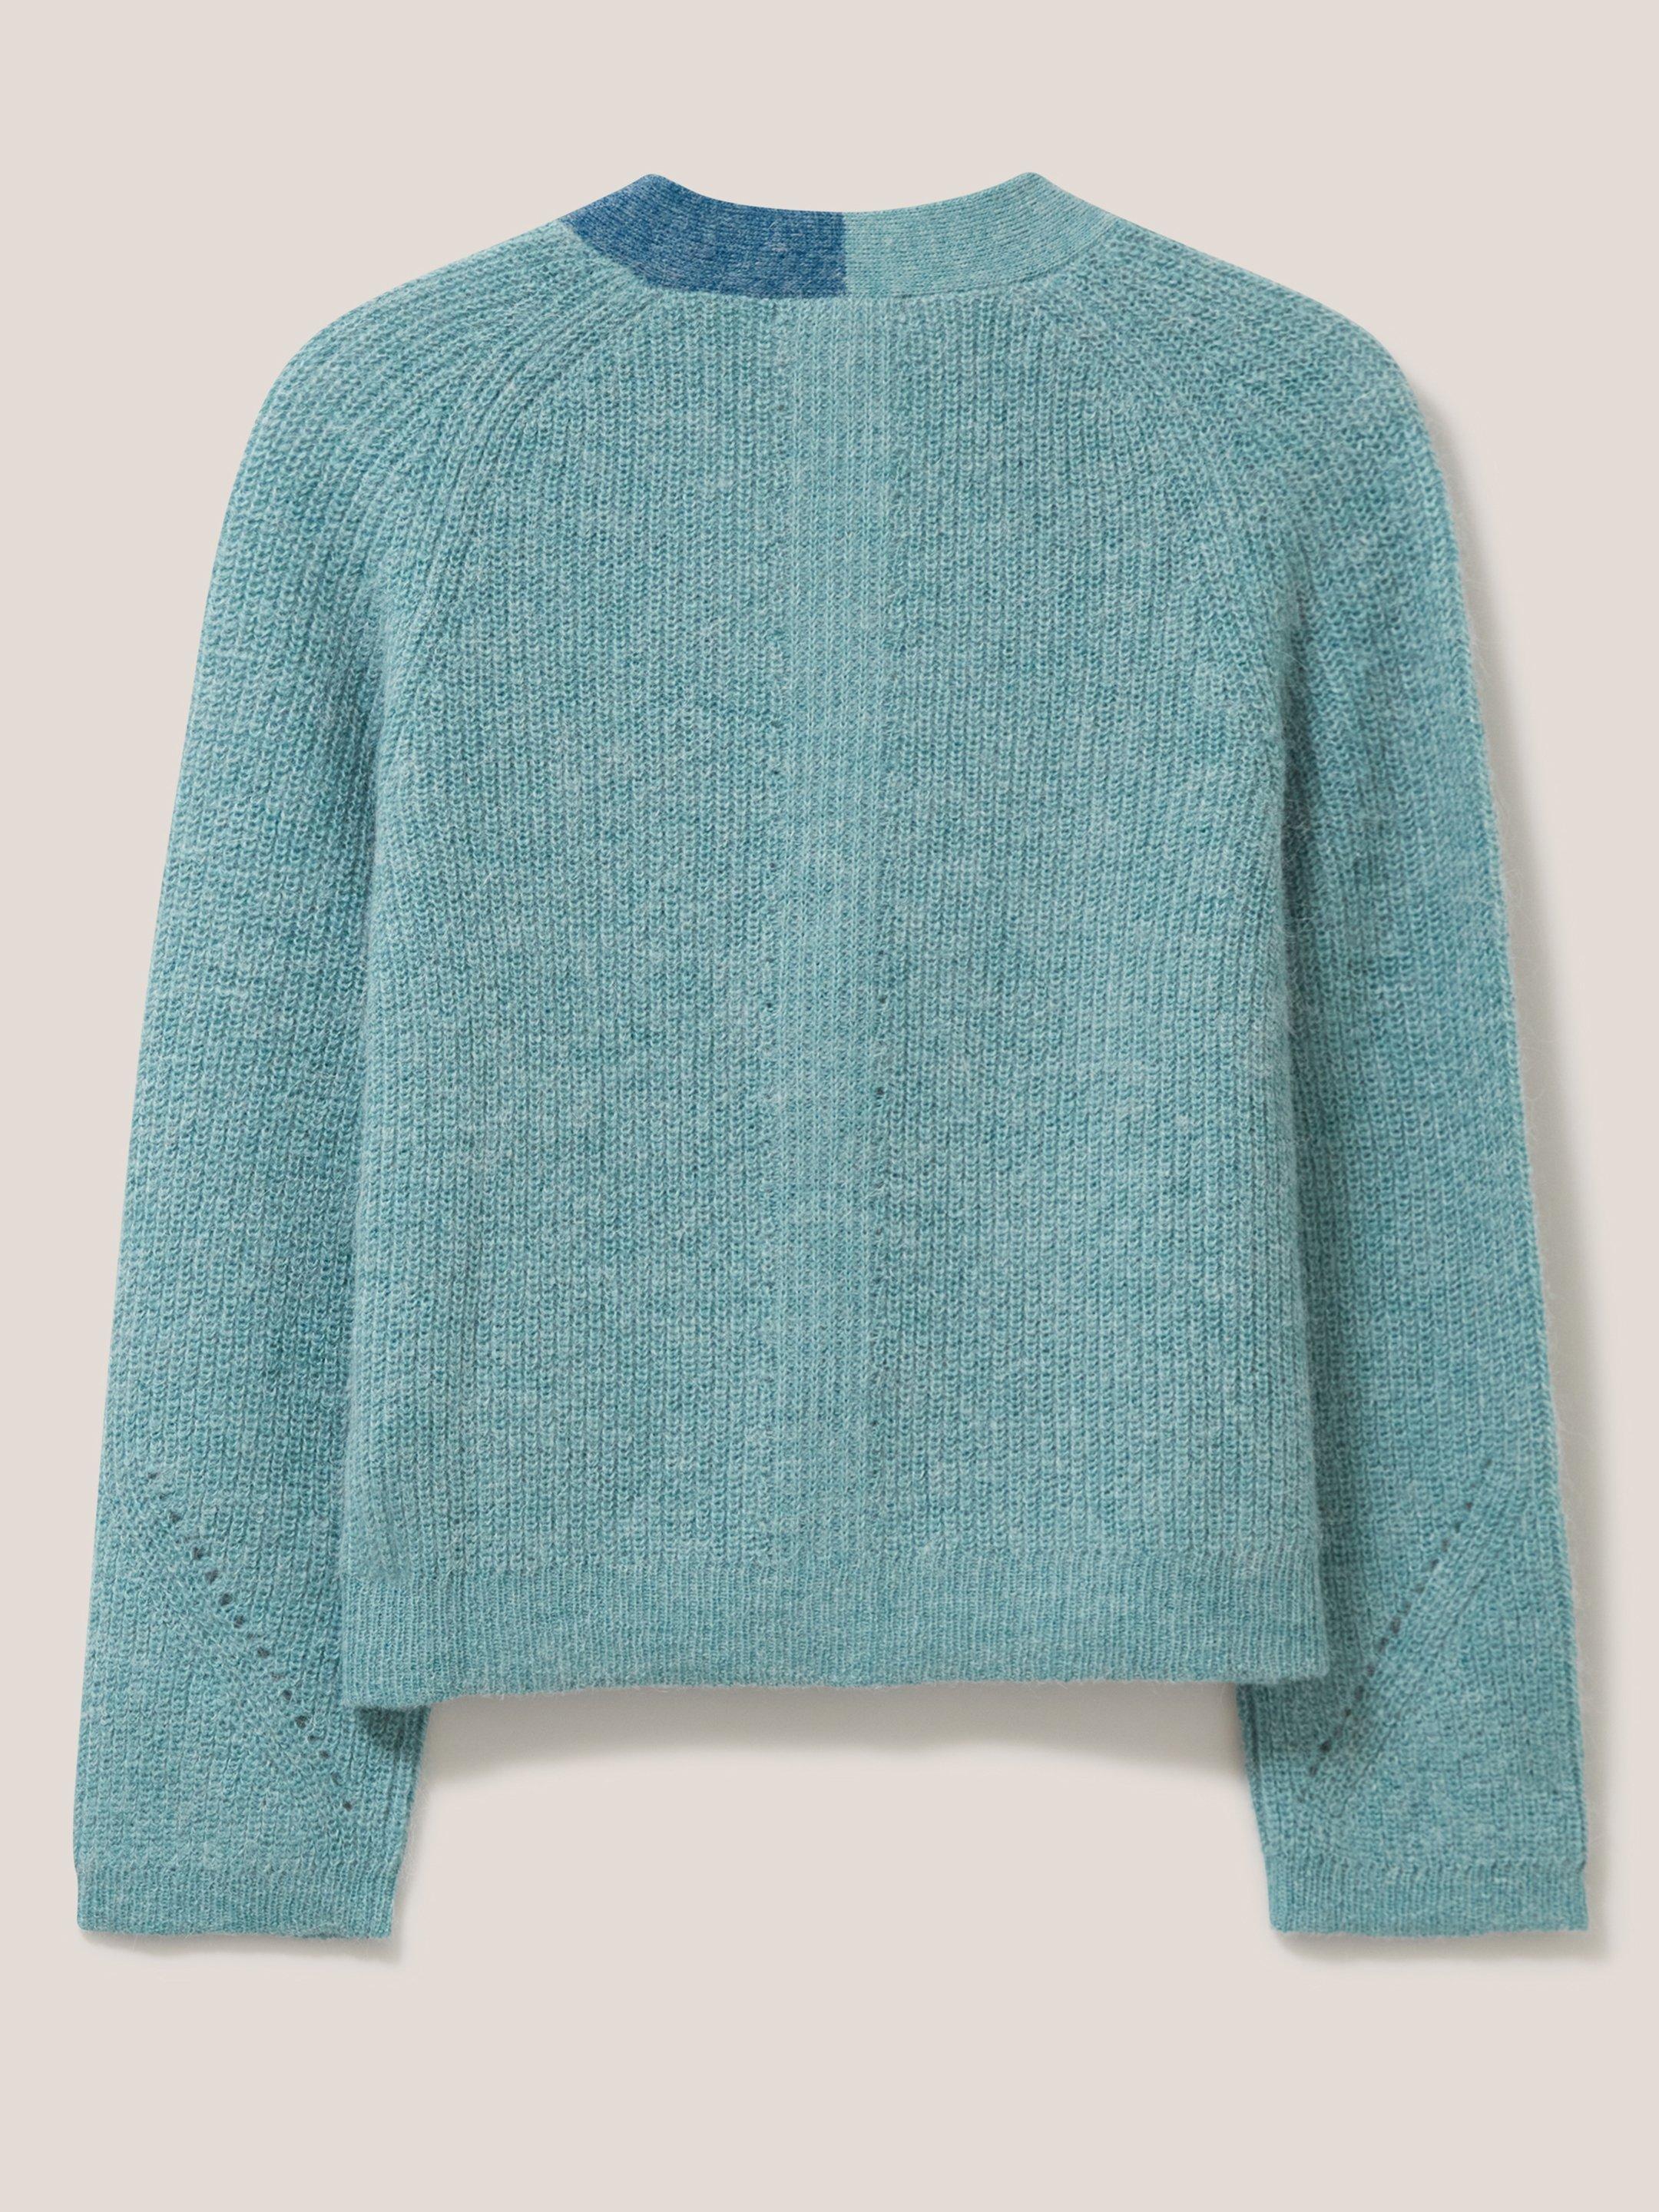 Dehlia Knitted Cardi in MID TEAL - FLAT BACK